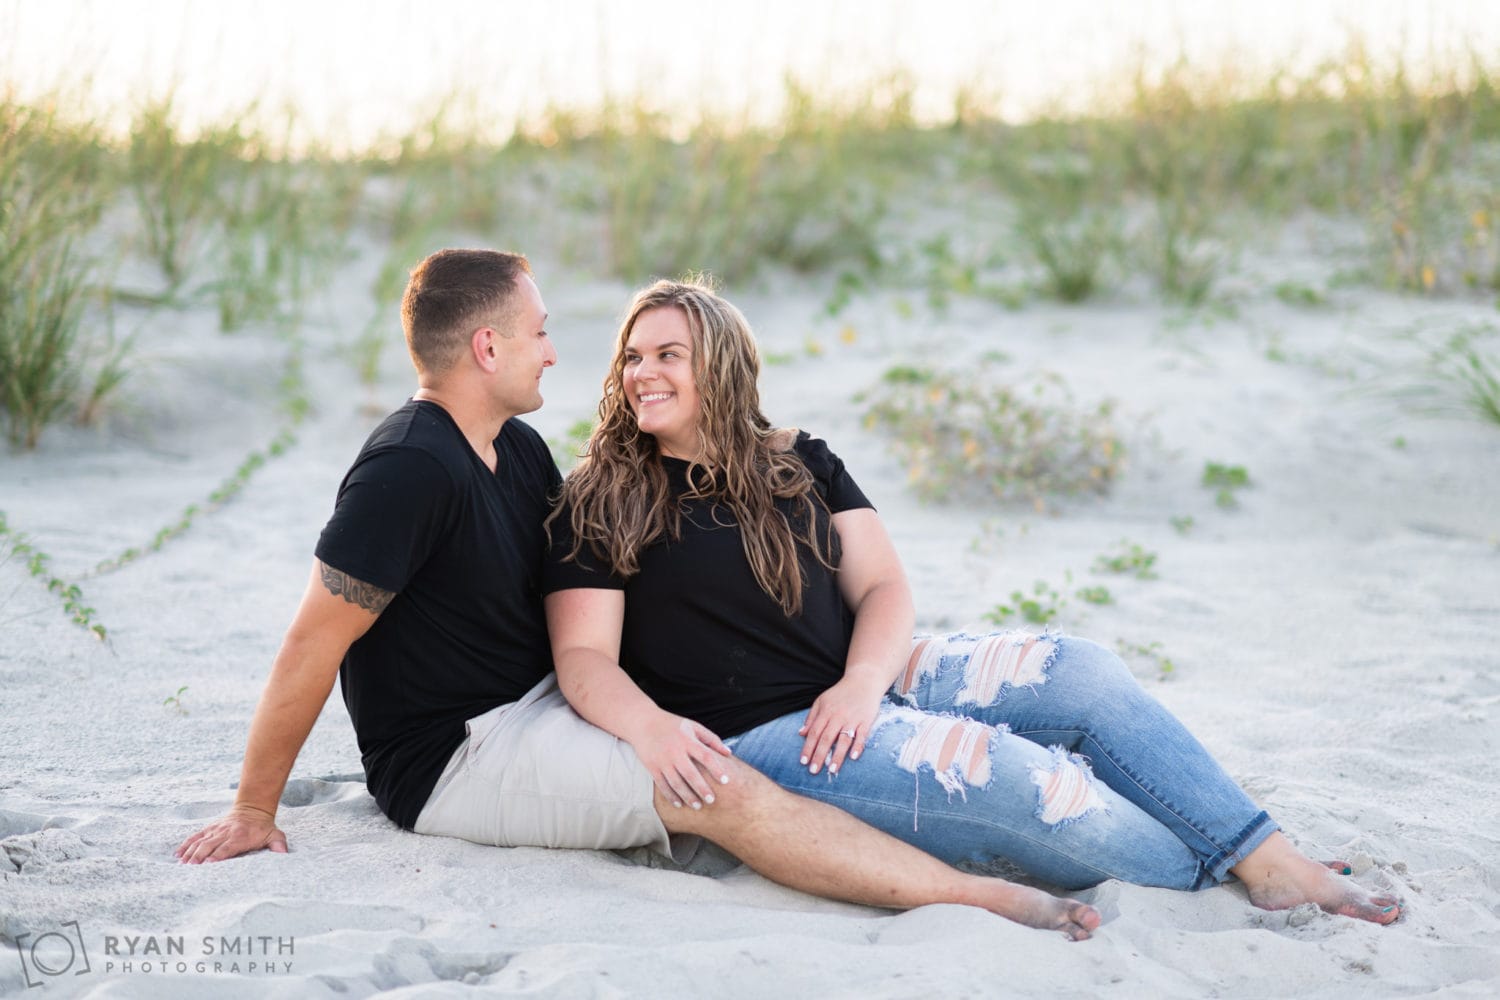 Engagement pictures with a great sunset at the State Park - Huntington Beach State Park